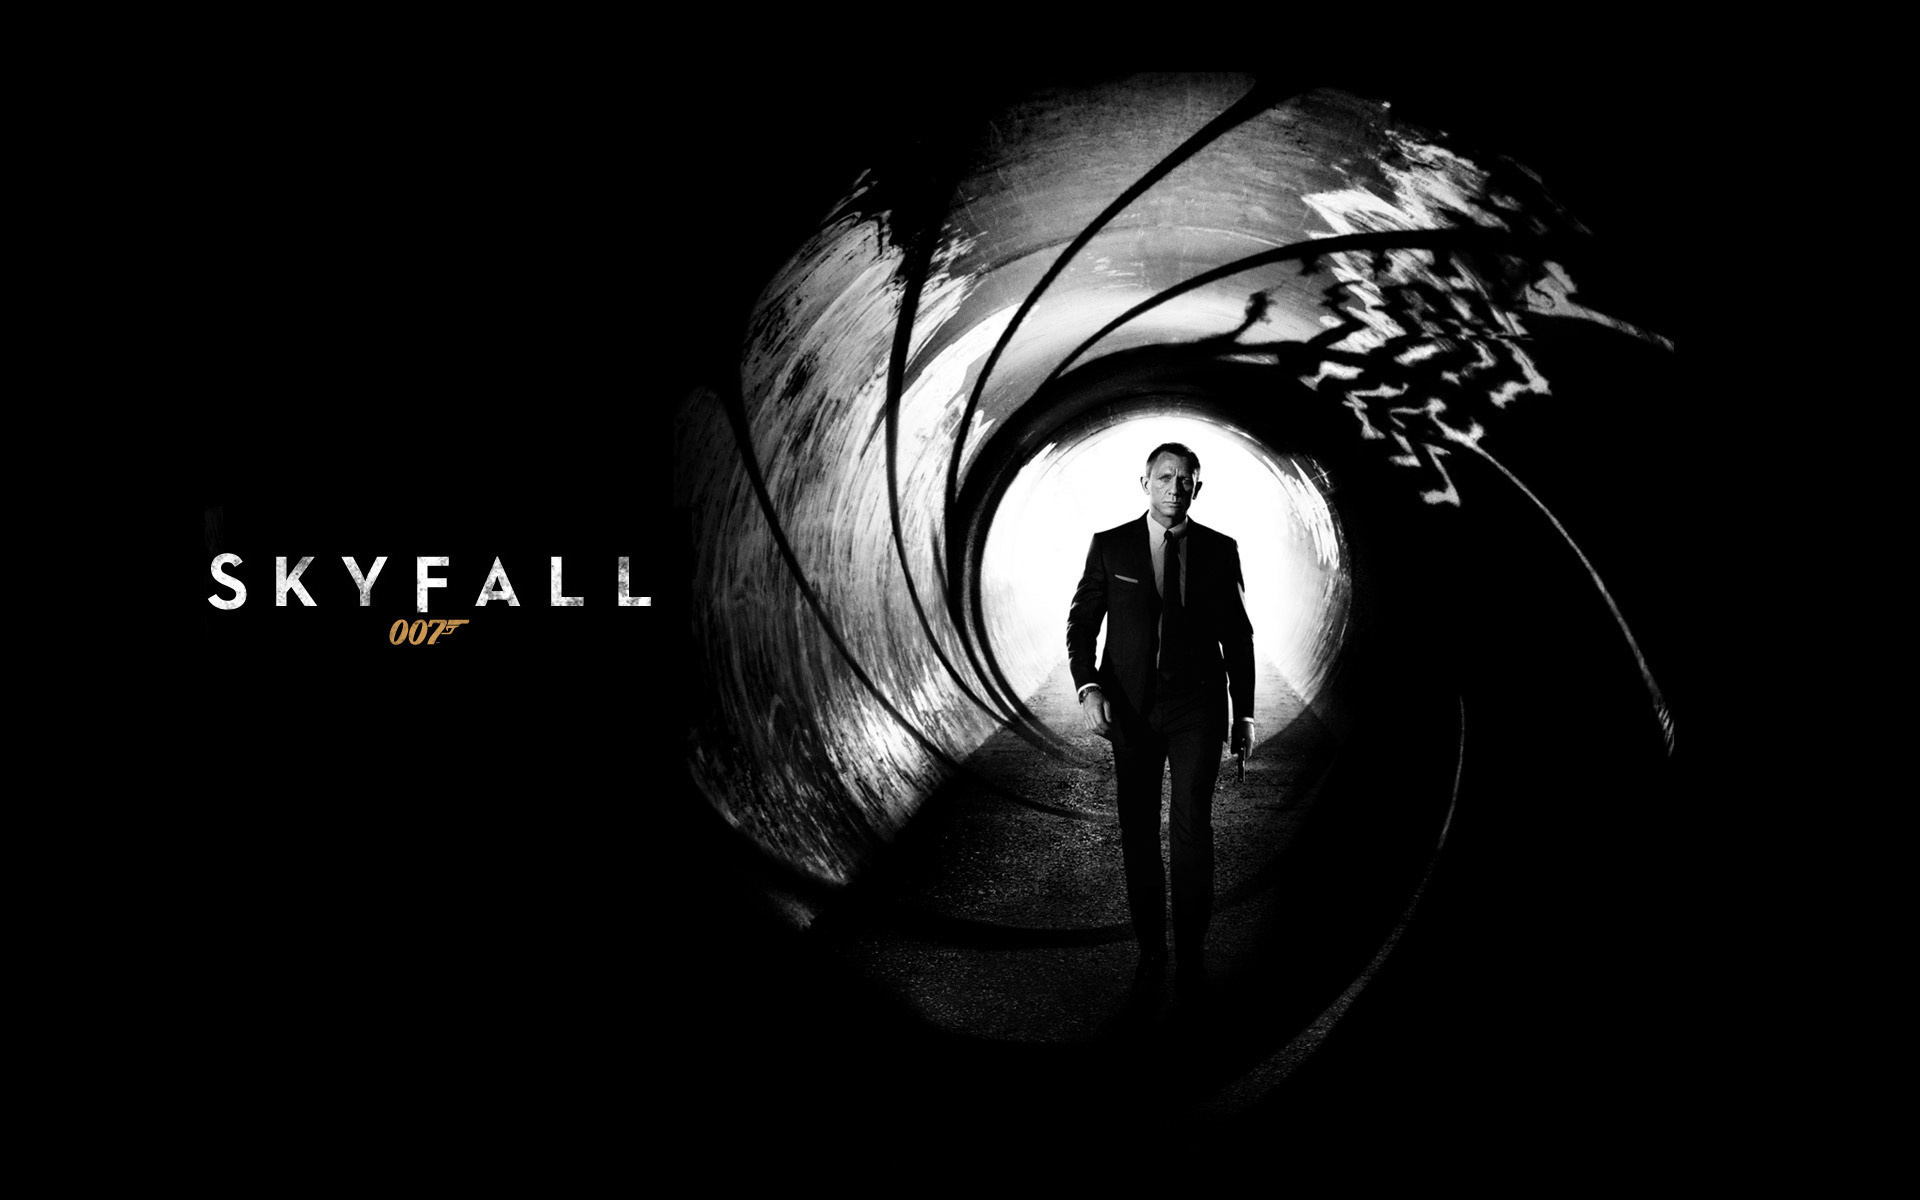 007 backgrounds, Action-packed wallpapers, Bond movie themes, 1920x1200 HD Desktop